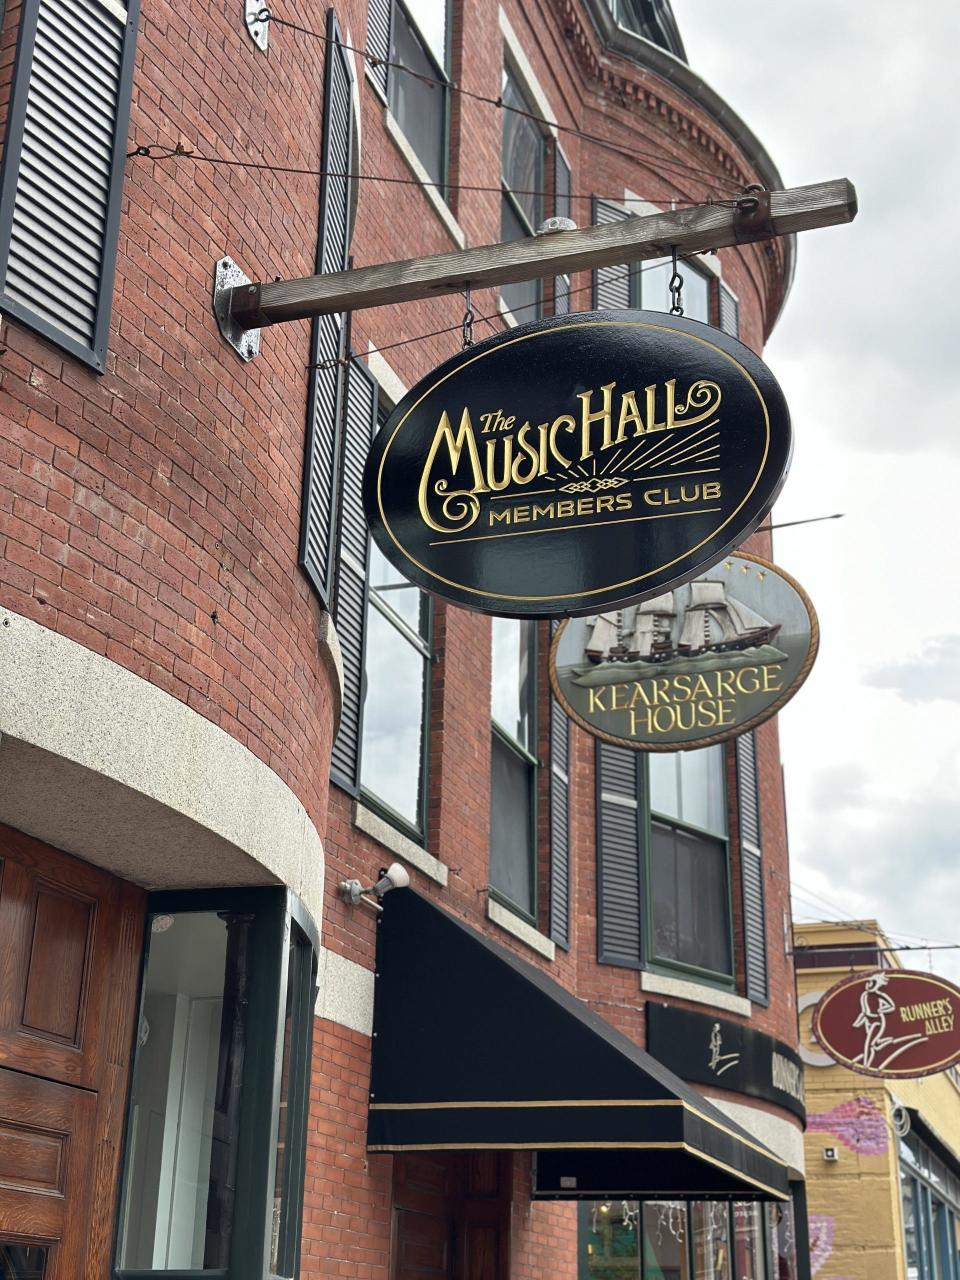 The Music Hall in Portsmouth has added a Members Club with access on Congress Street.